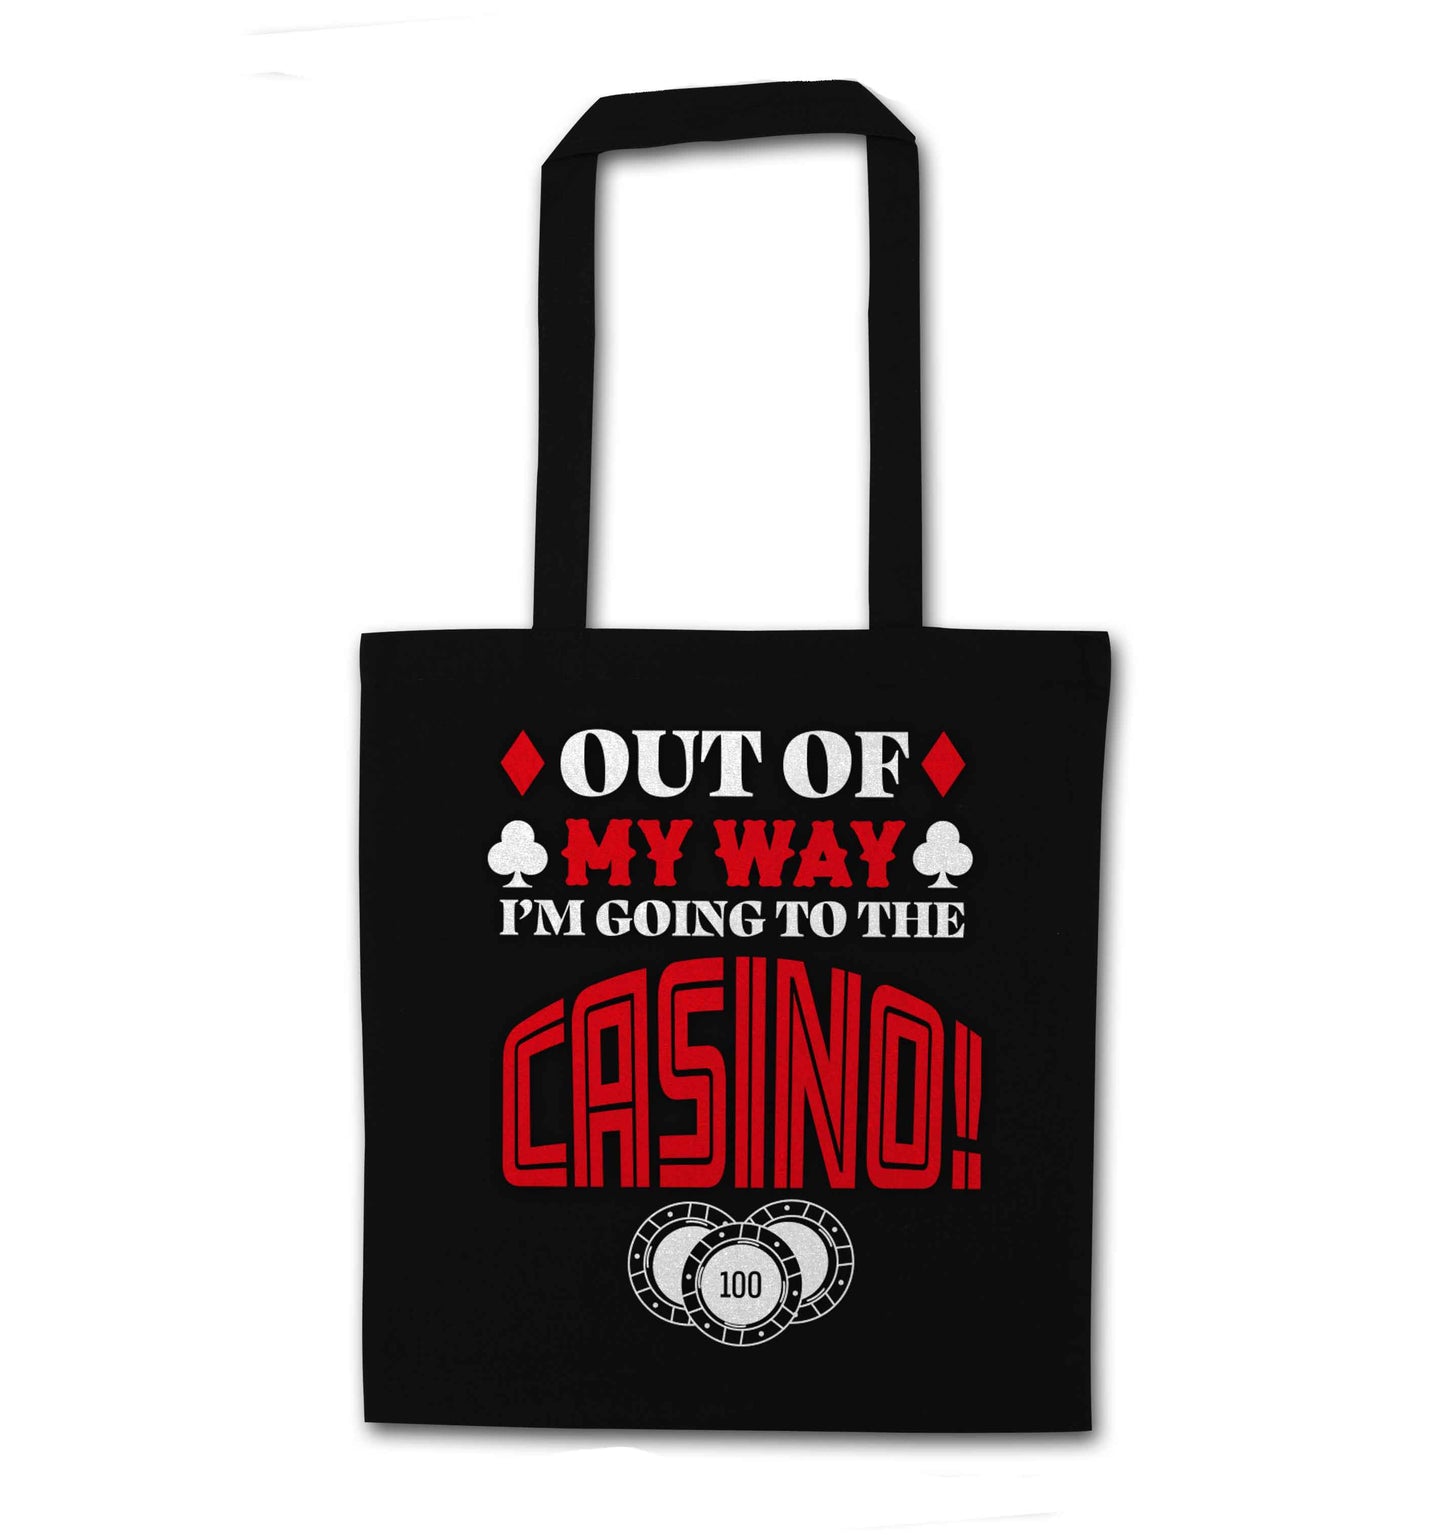 Out of my way I'm going to the casino black tote bag